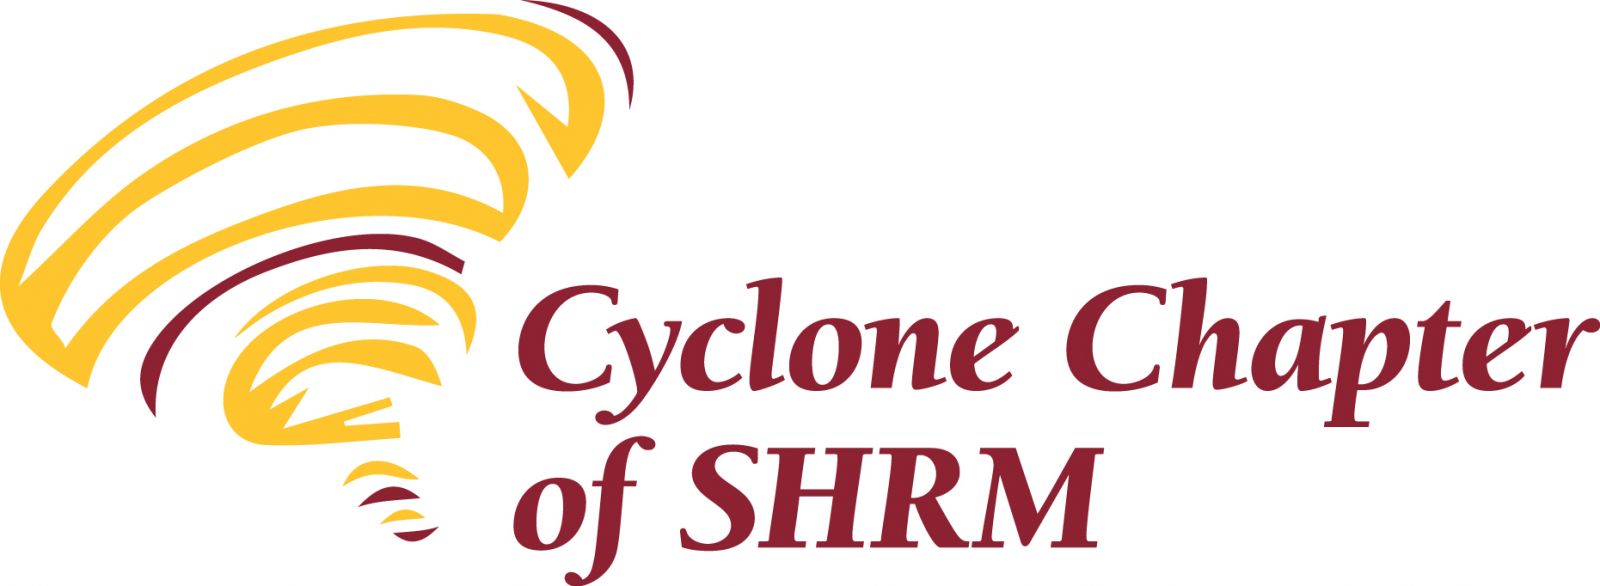 Cyclone Chapter of SHRM